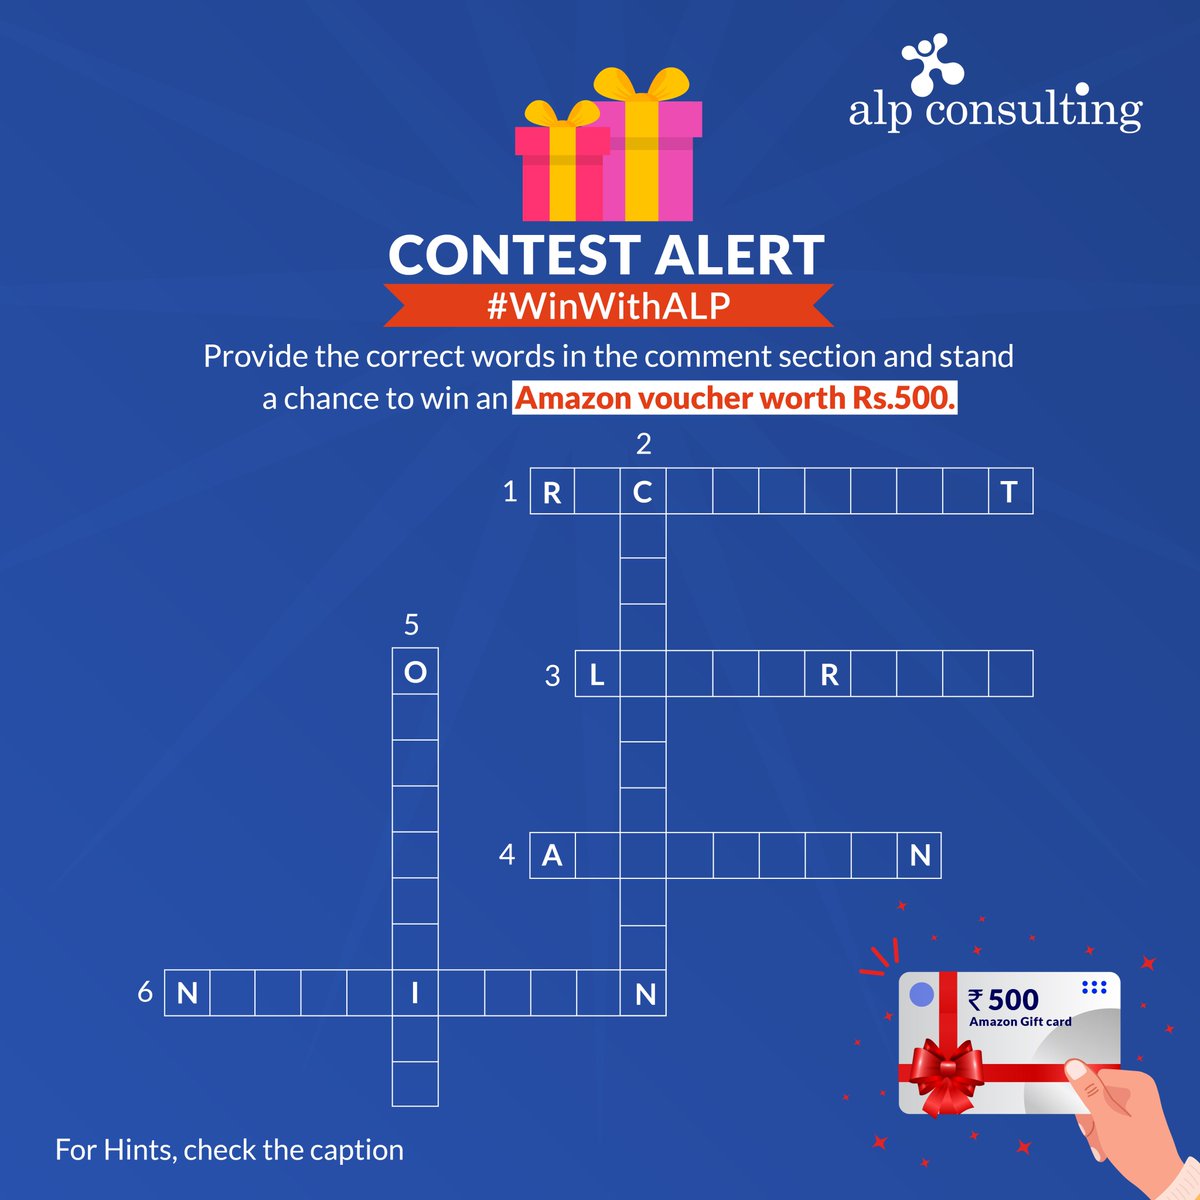 Contest Alert 🚨

#WinWithALP Contest is Back.

Comment with the correct answer and stand a chance to win an Amazon voucher worth Rs.500.

Comment now!  #ContestAlert #ContestIndia #Contest #contestgiveaway #ALPConsulting #Giveaway #participation #contesttime